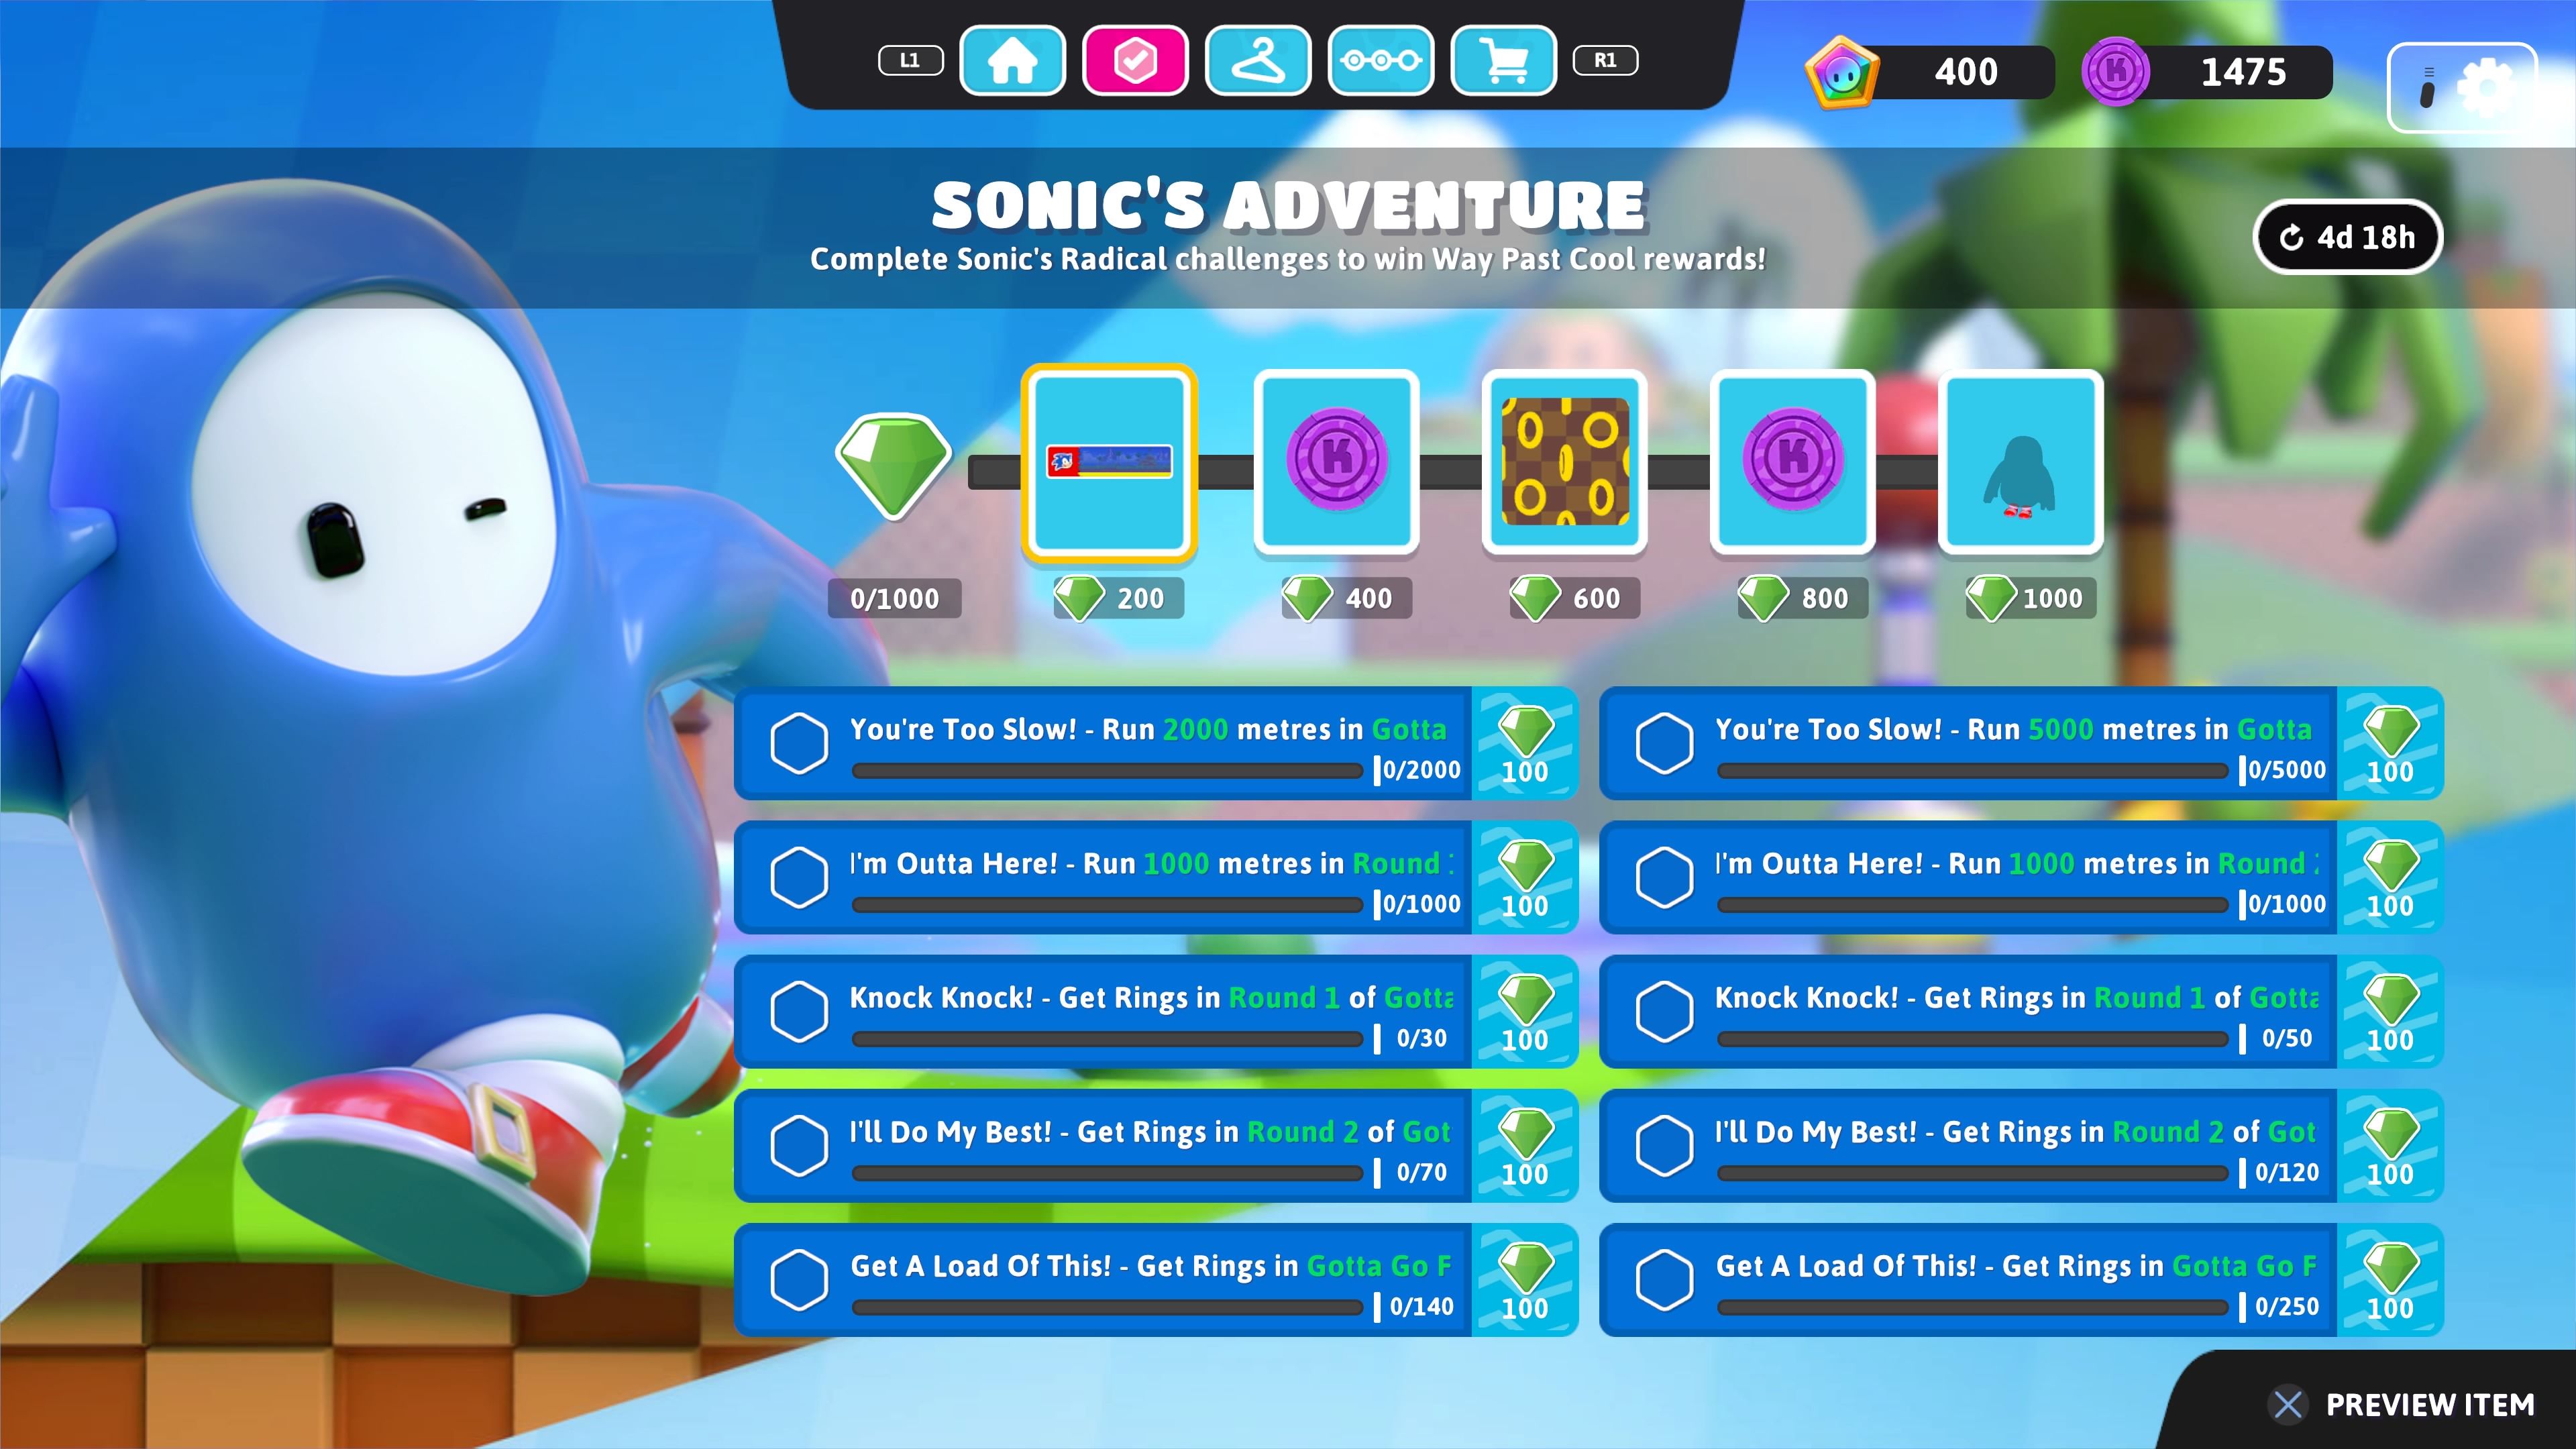 Sonic's Adventure Event Challenges and Rewards page from Fall Guys